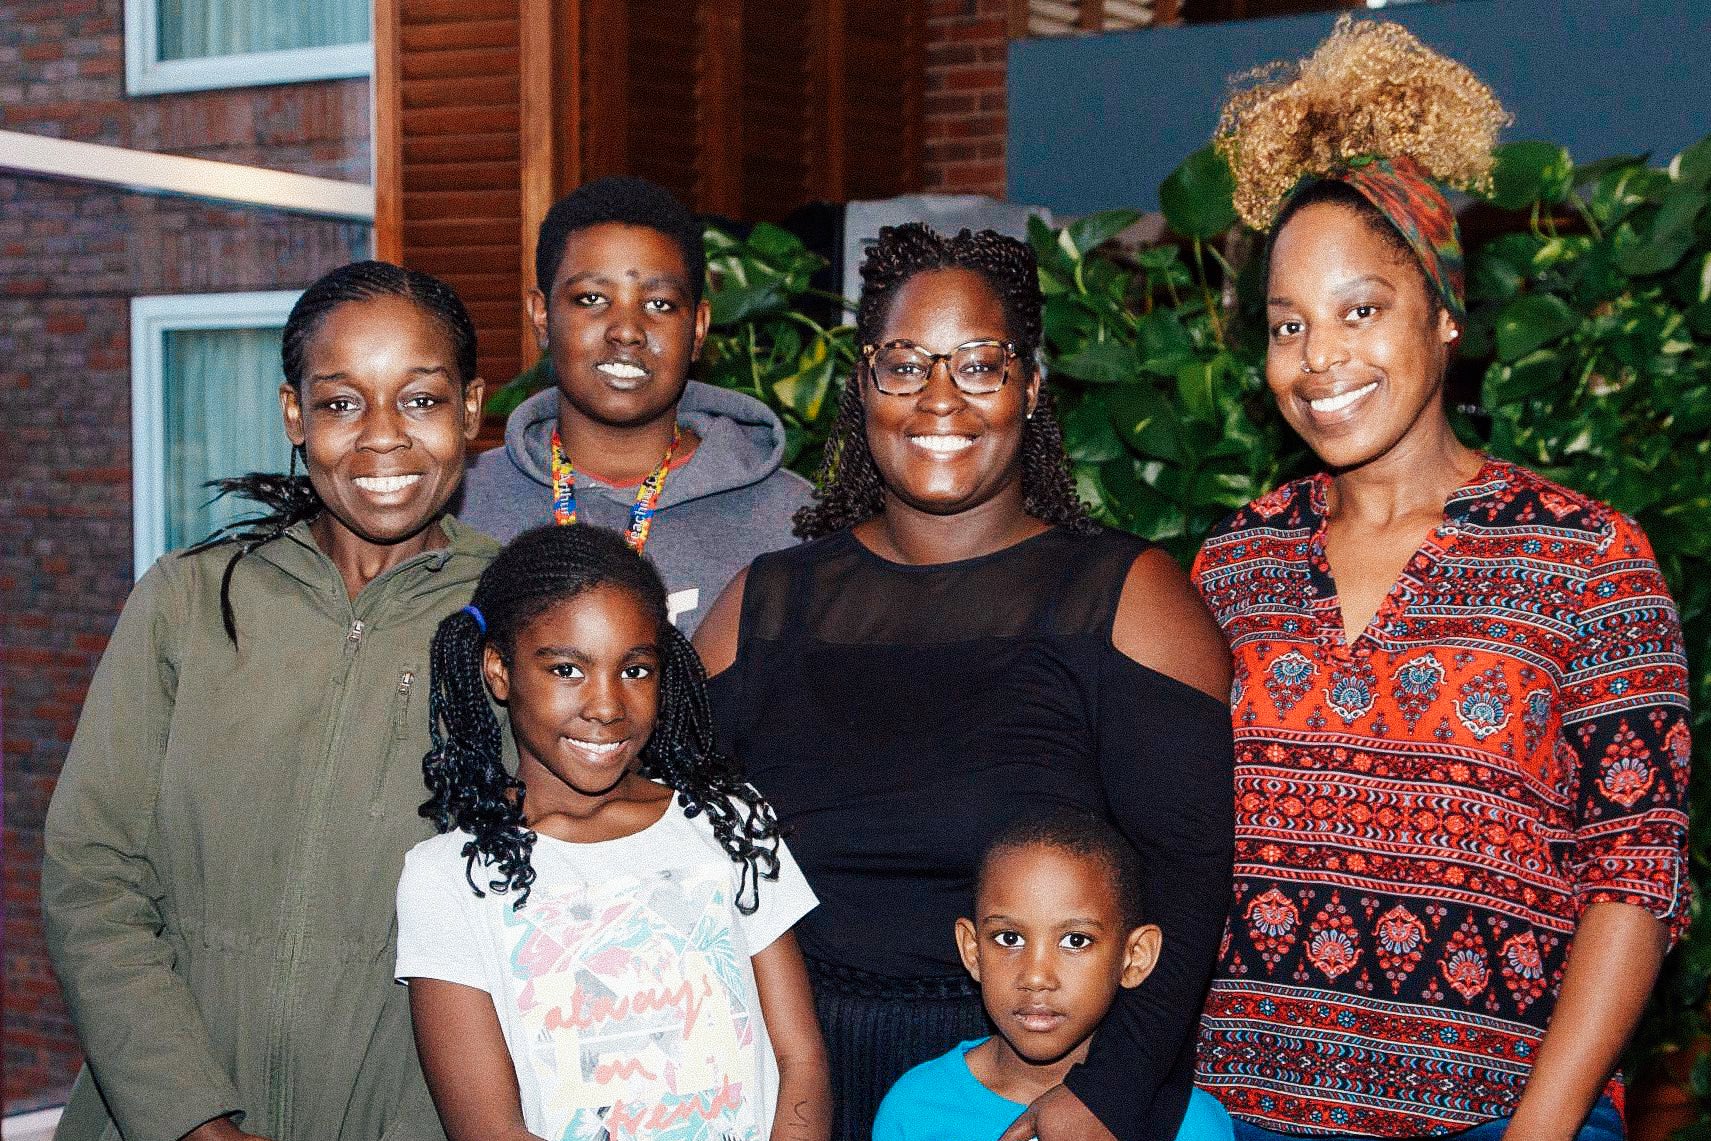 Gardite Fougy is pictured at center with her sister Stephanie Fougy (far left) and friend Aisha Baker (far right), and Fougy's three children: Myien, 14, Myiella, 9, and Gabriel, 6. 